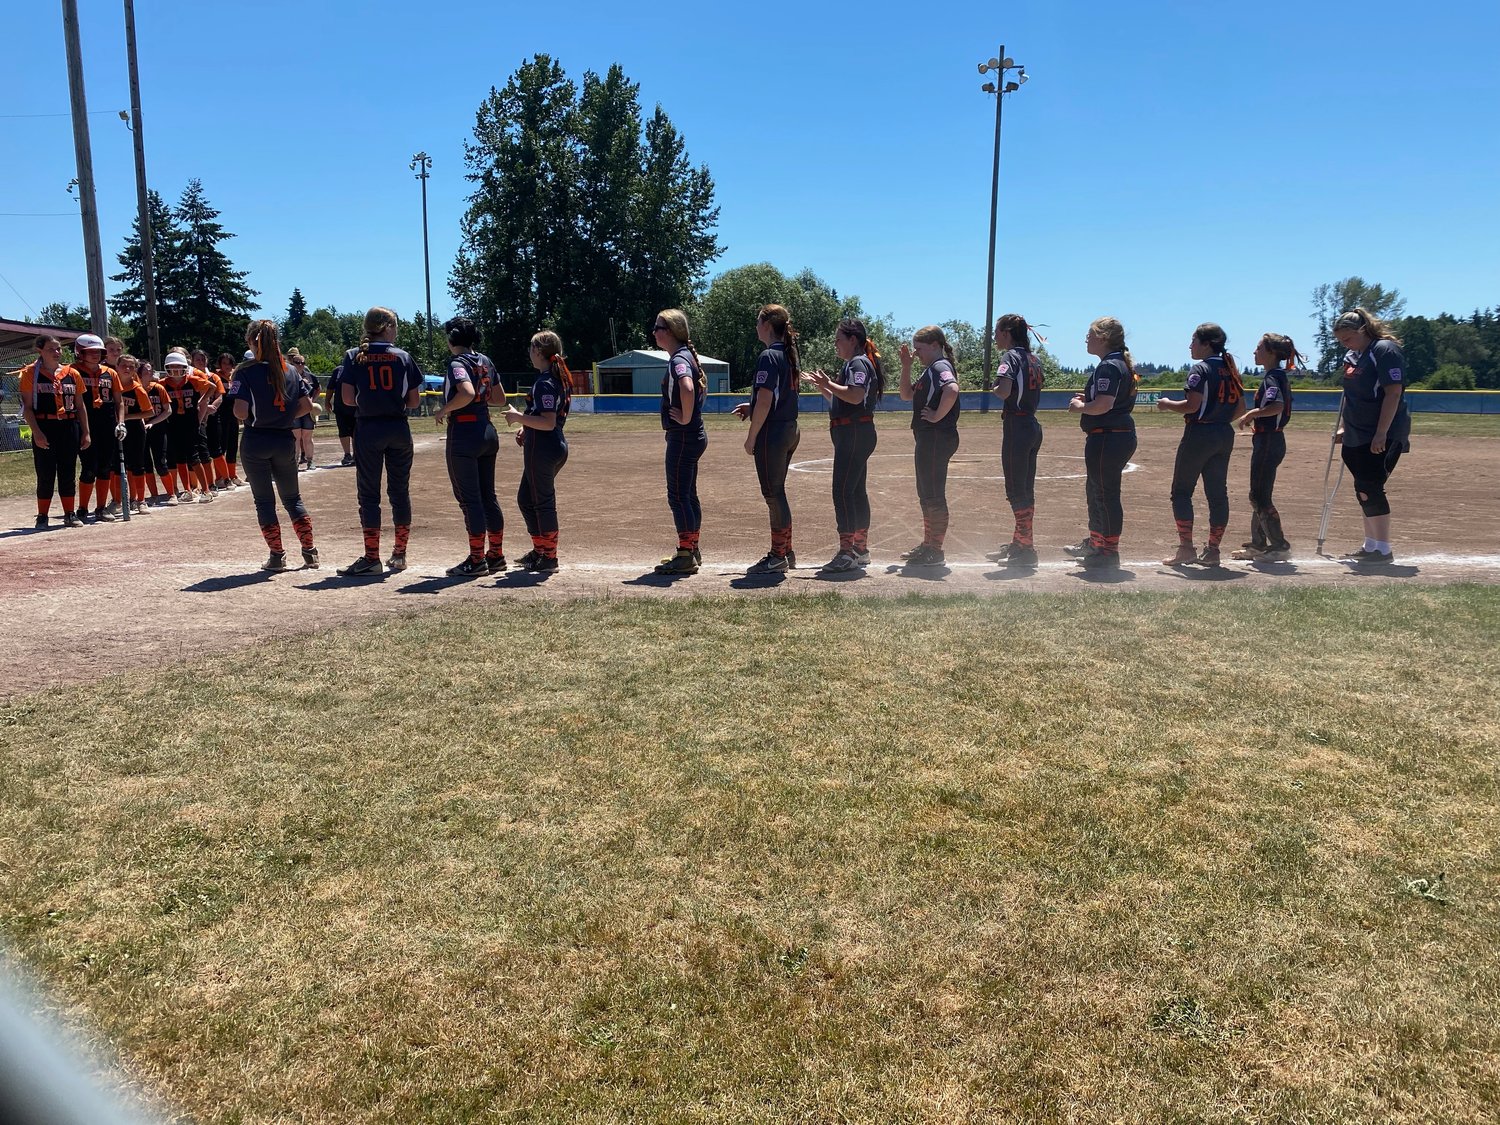 The Battle Ground Little League Junior softball team played Kalama during the district tournament on June 27 at Glenwood Little League field.